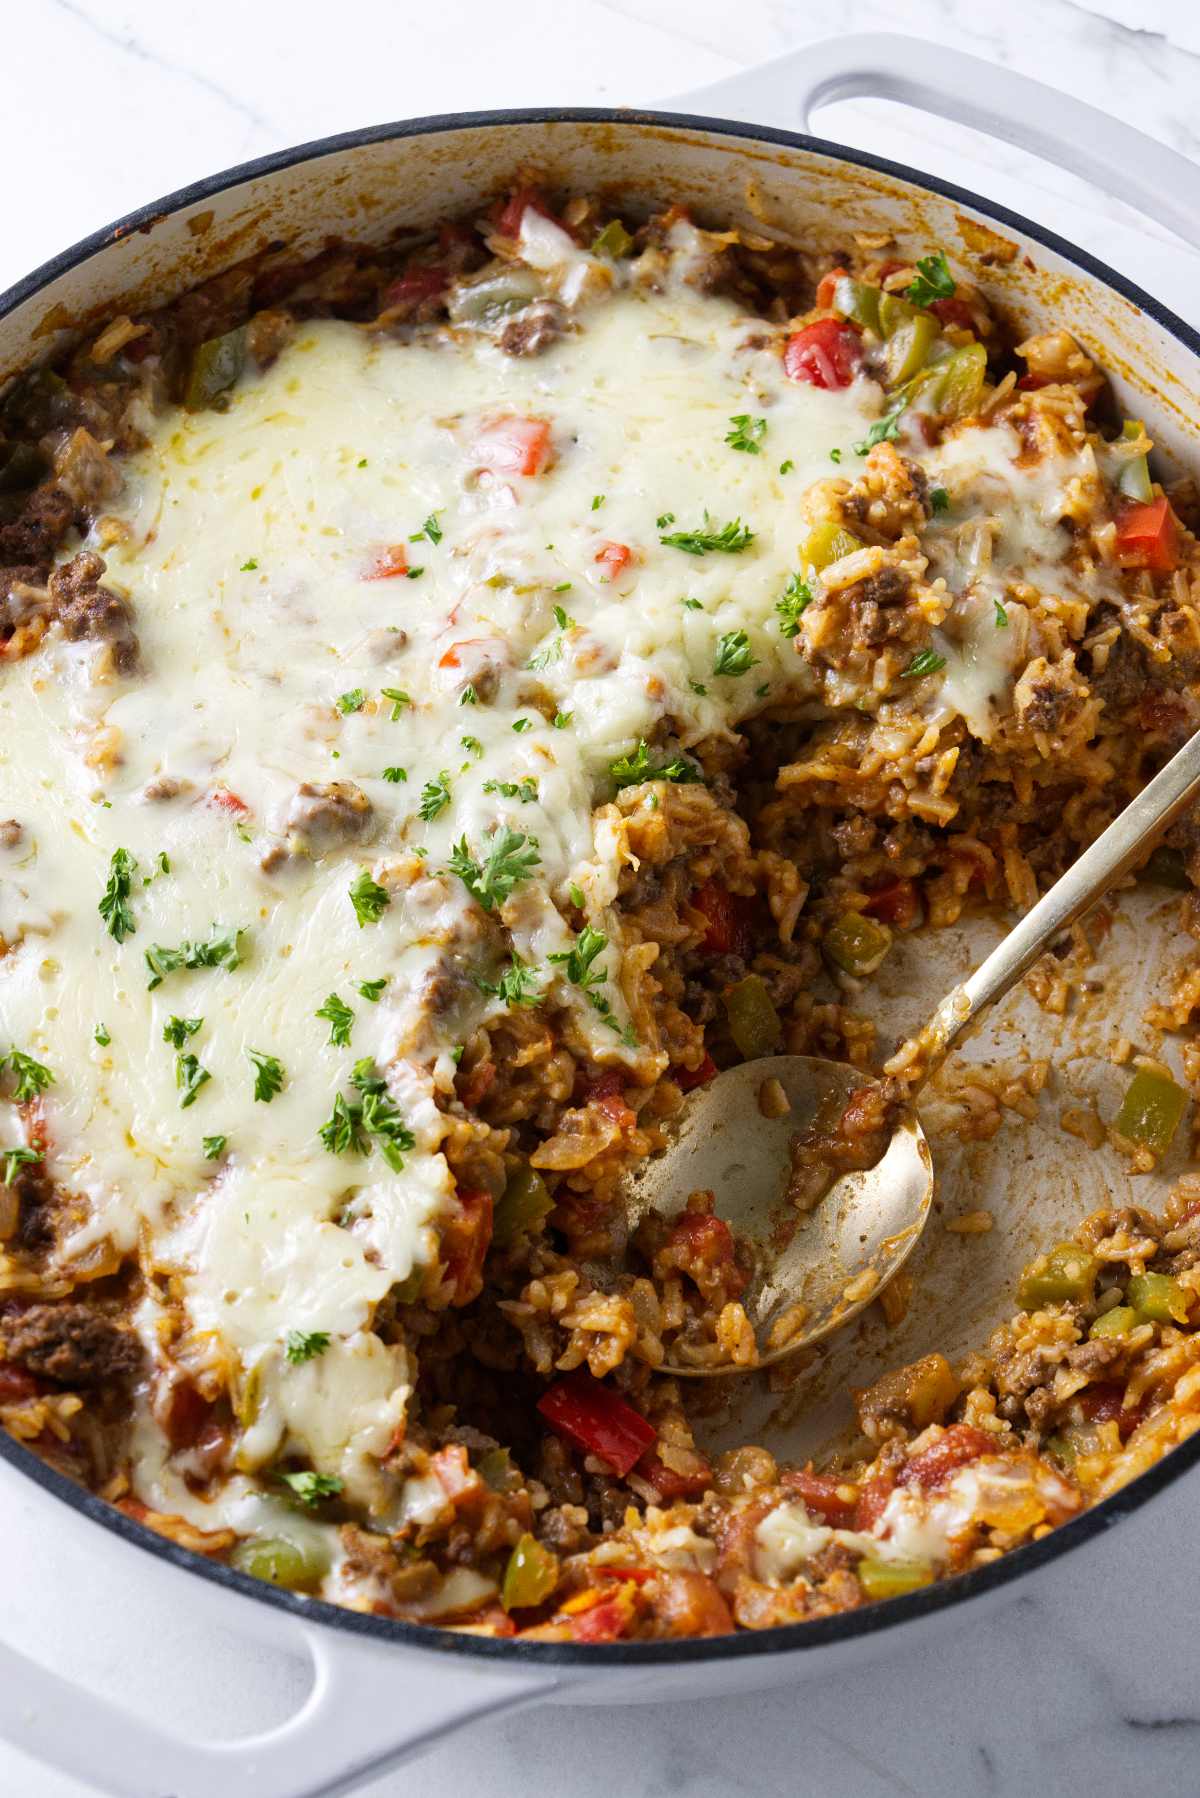 A skillet casserole with ground beef, bell peppers, and rice.